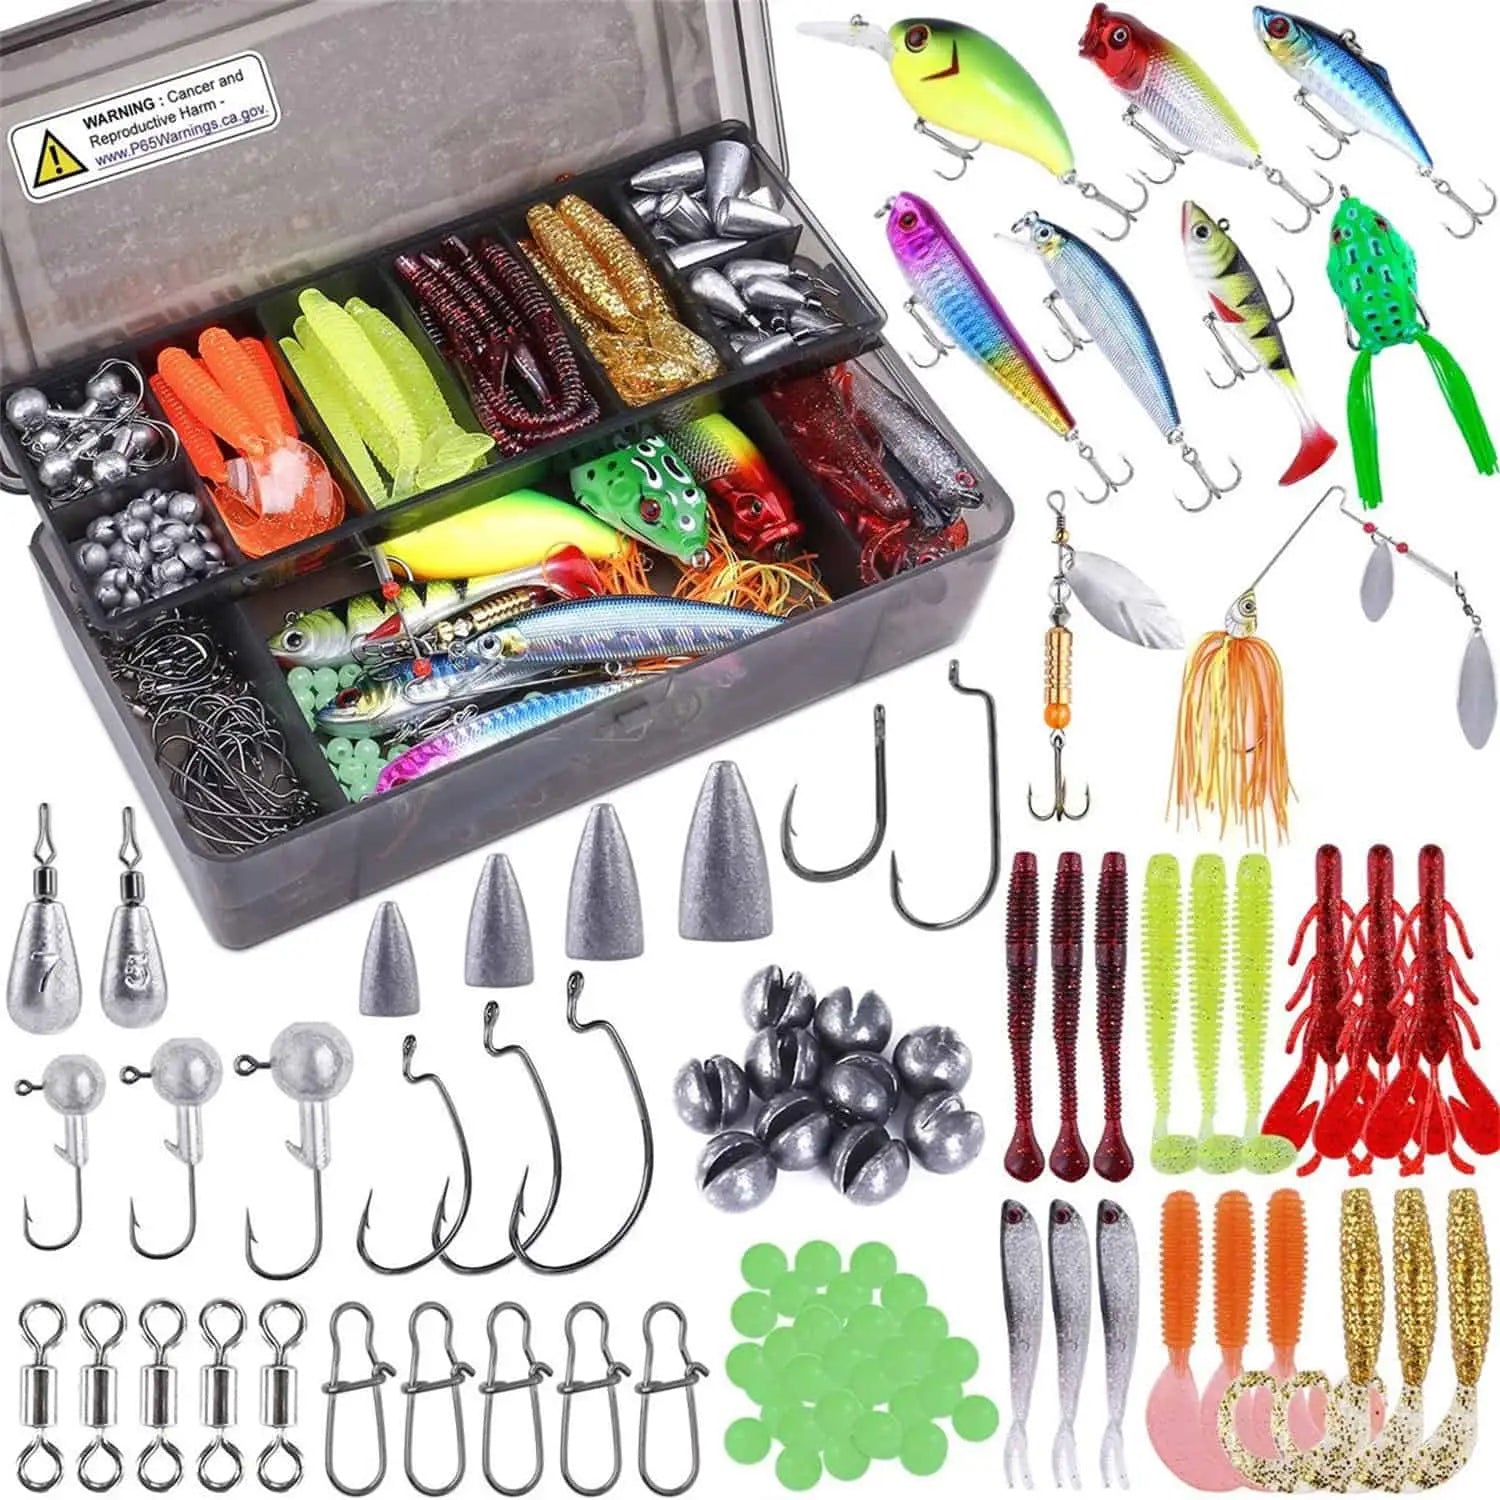 PLUSINNO 397pcs Fishing Accessories Kit, Fishing Tackle Box with Tackle  Included, Hooks, Weights, Jig Heads, Swivels Snaps Combined into 12 Rigs,  Fishing Gear Equipment for Bass, Bait Rigs -  Canada